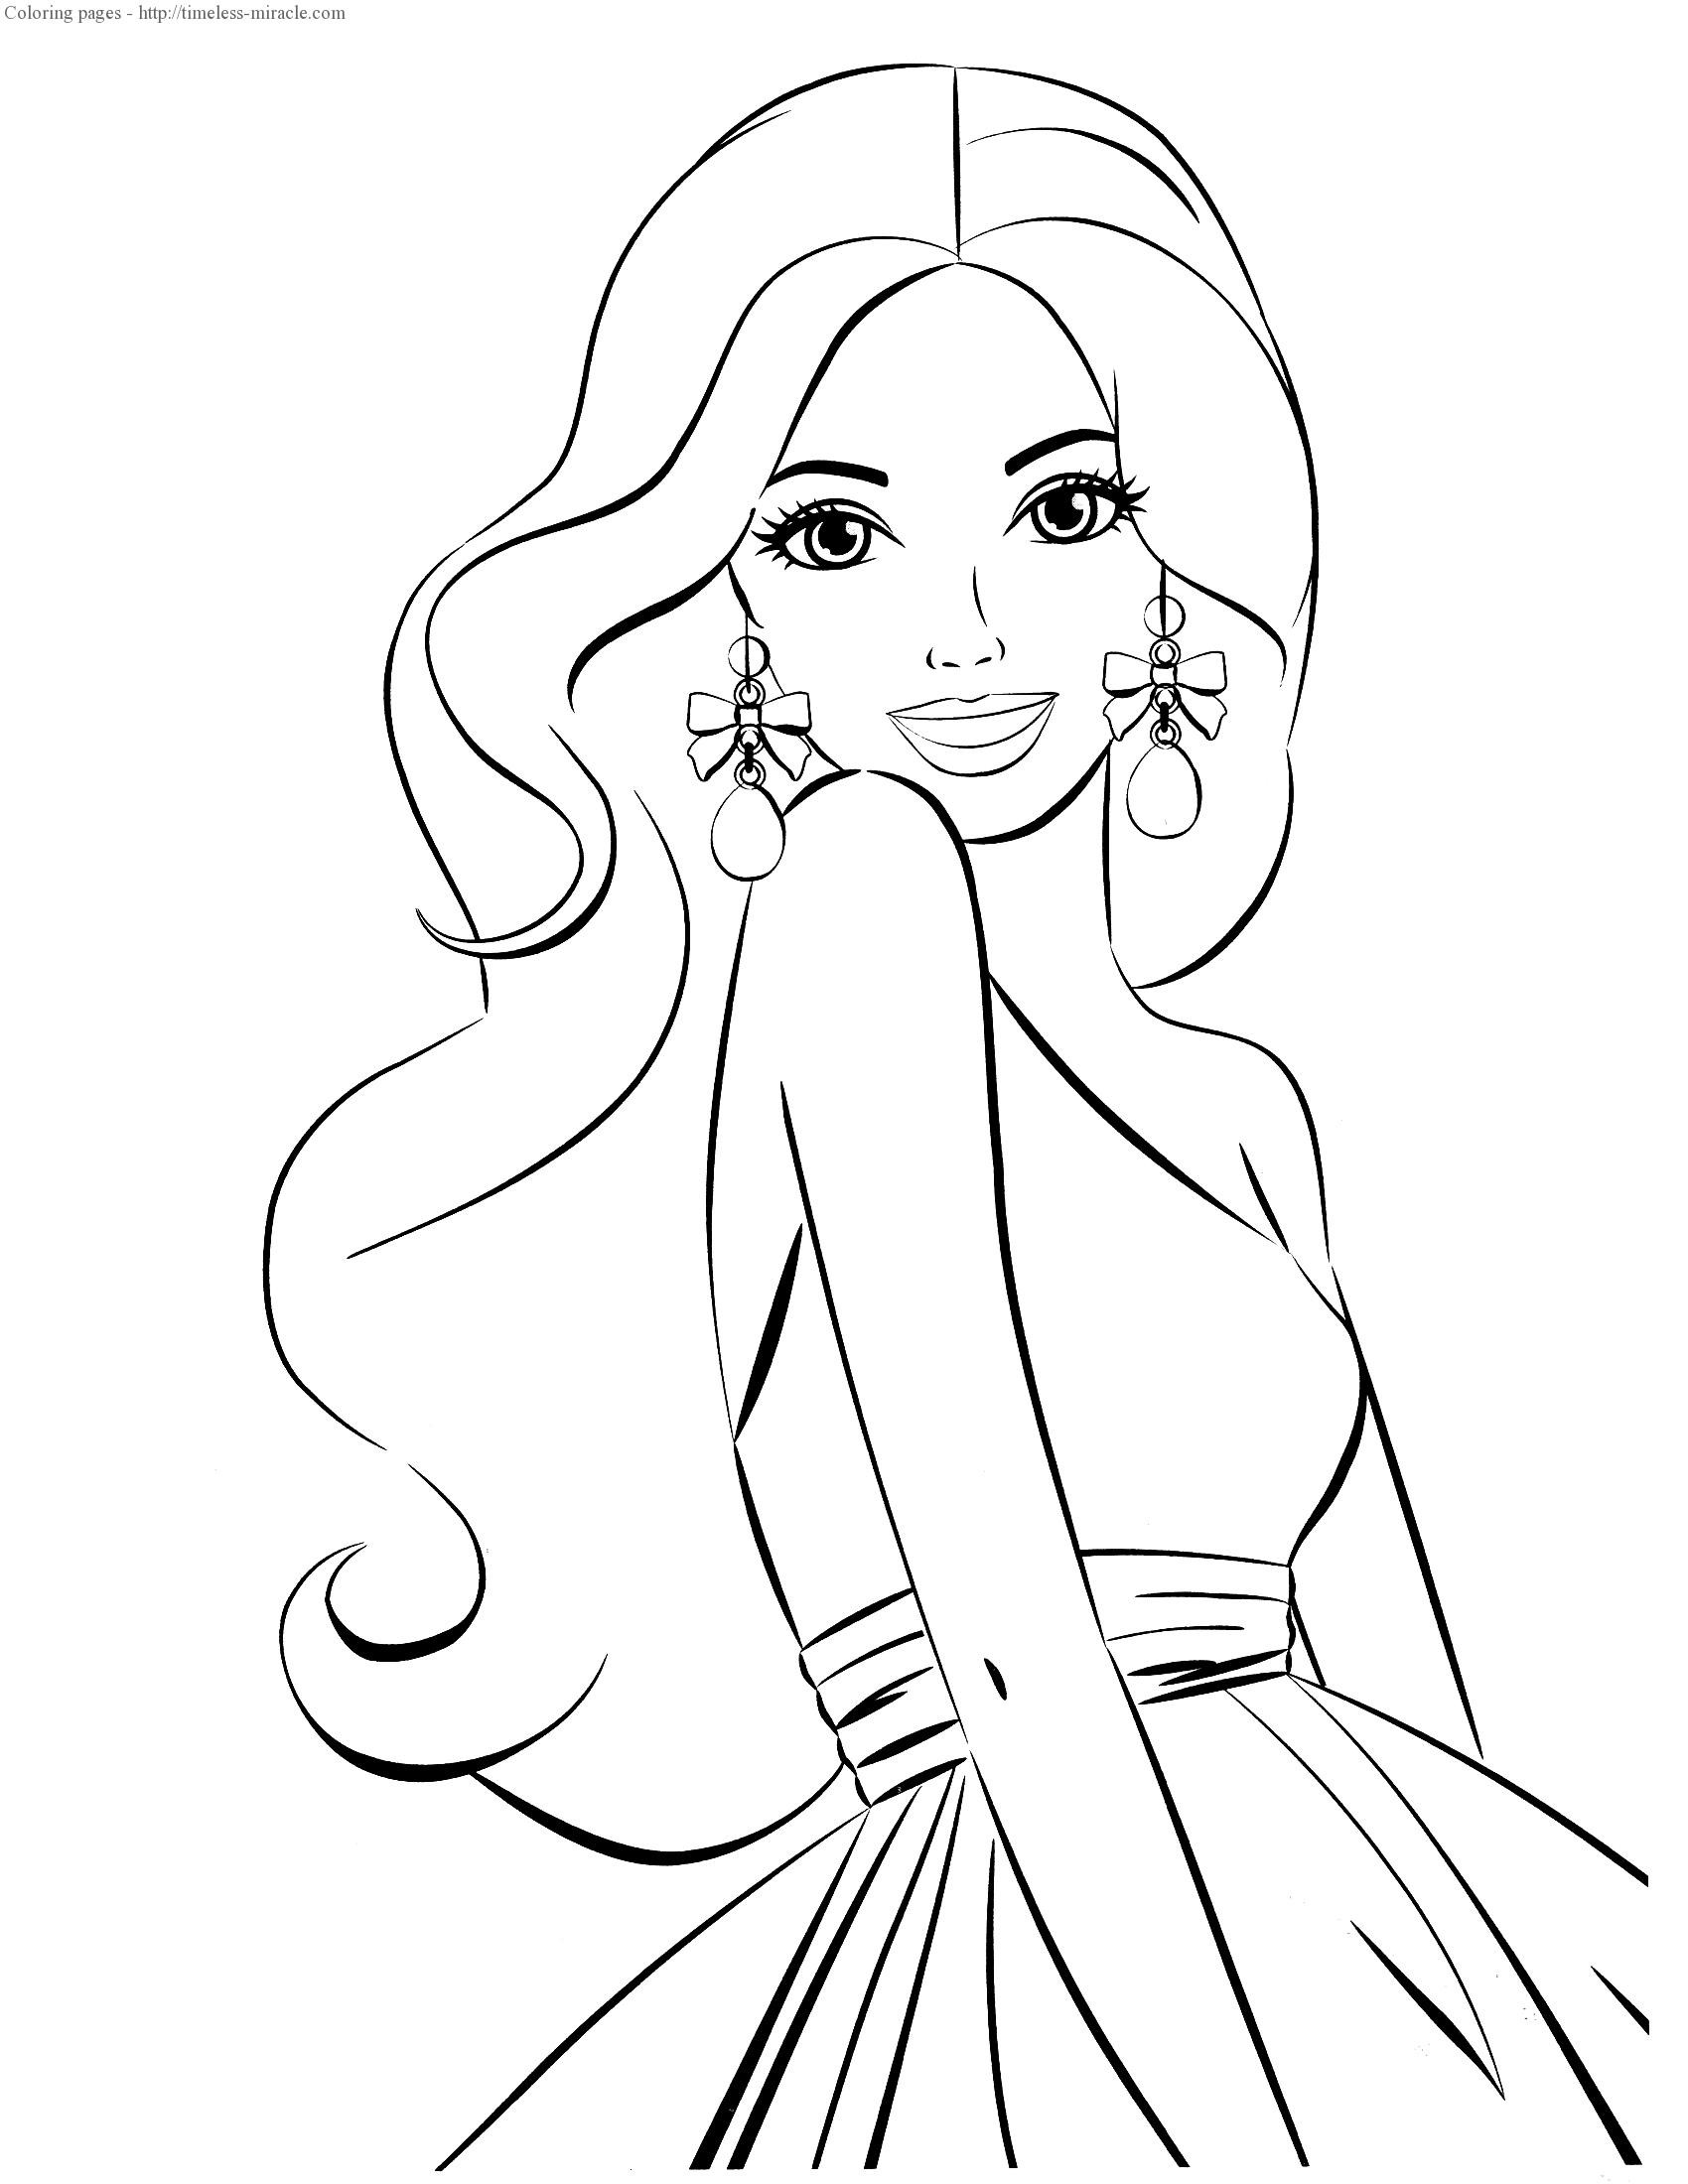 Barbie Coloring Pages For Girls
 Barbie coloring pages for girls